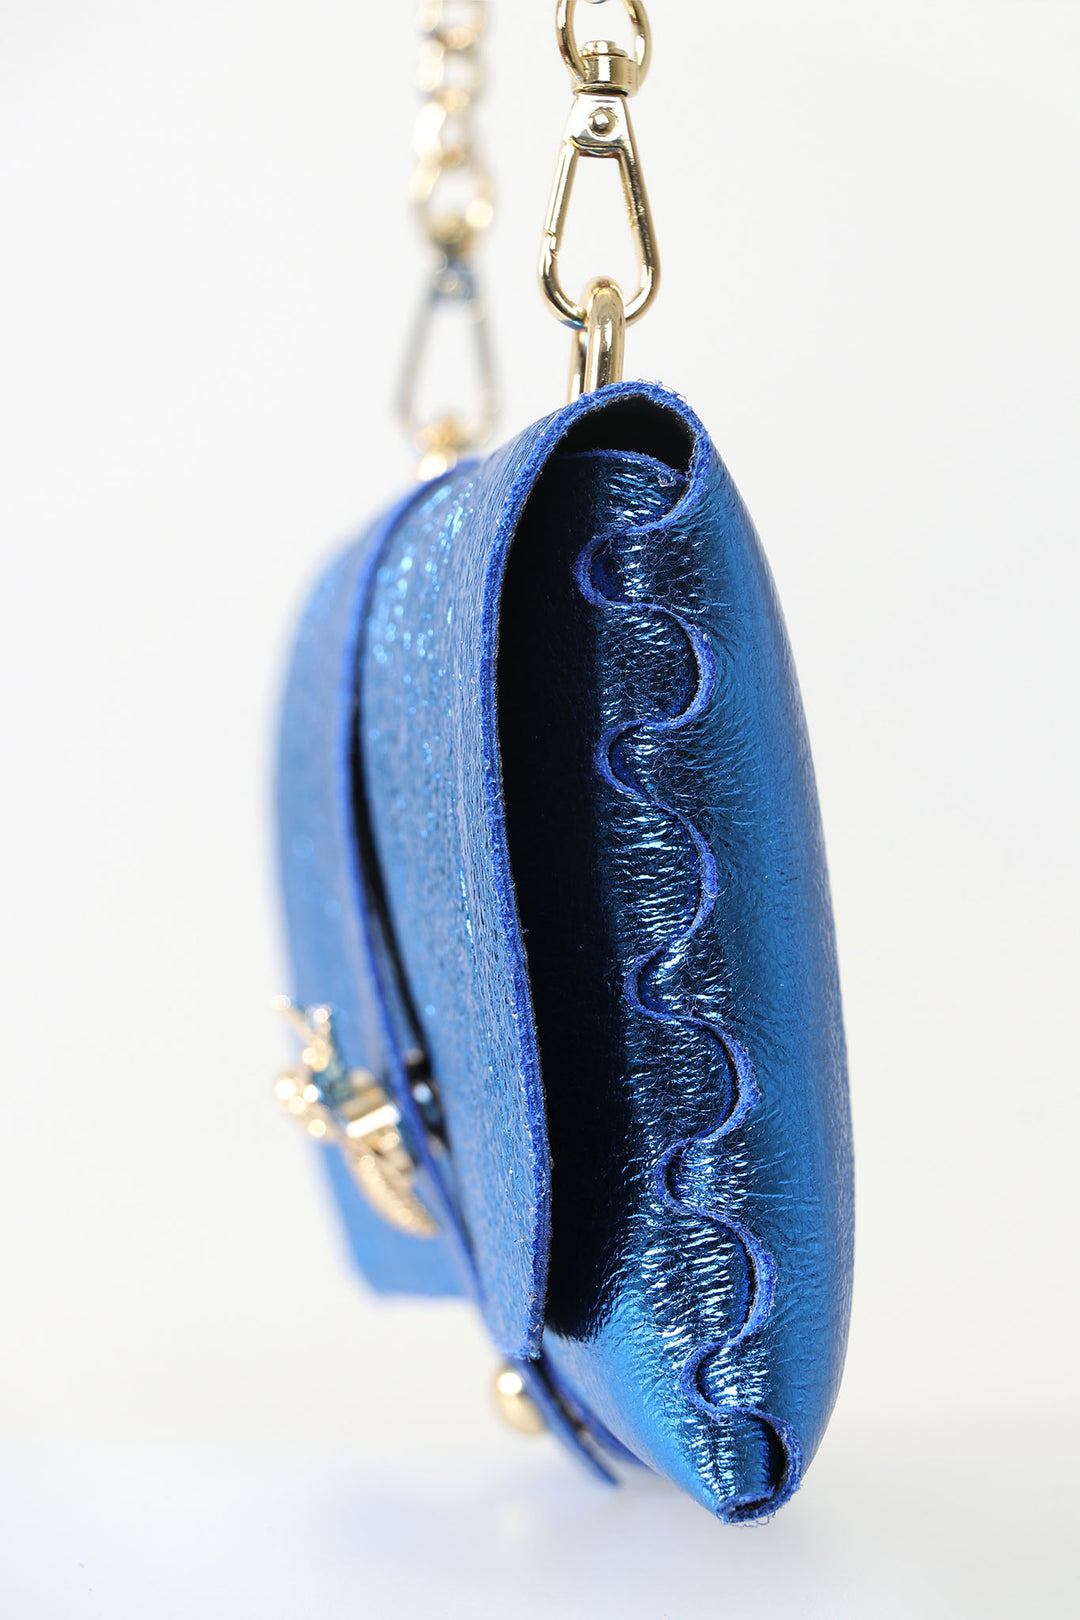 Metallic Royal Blue Bee Emblem Leather Clutch Bag with Gold Chain Strap